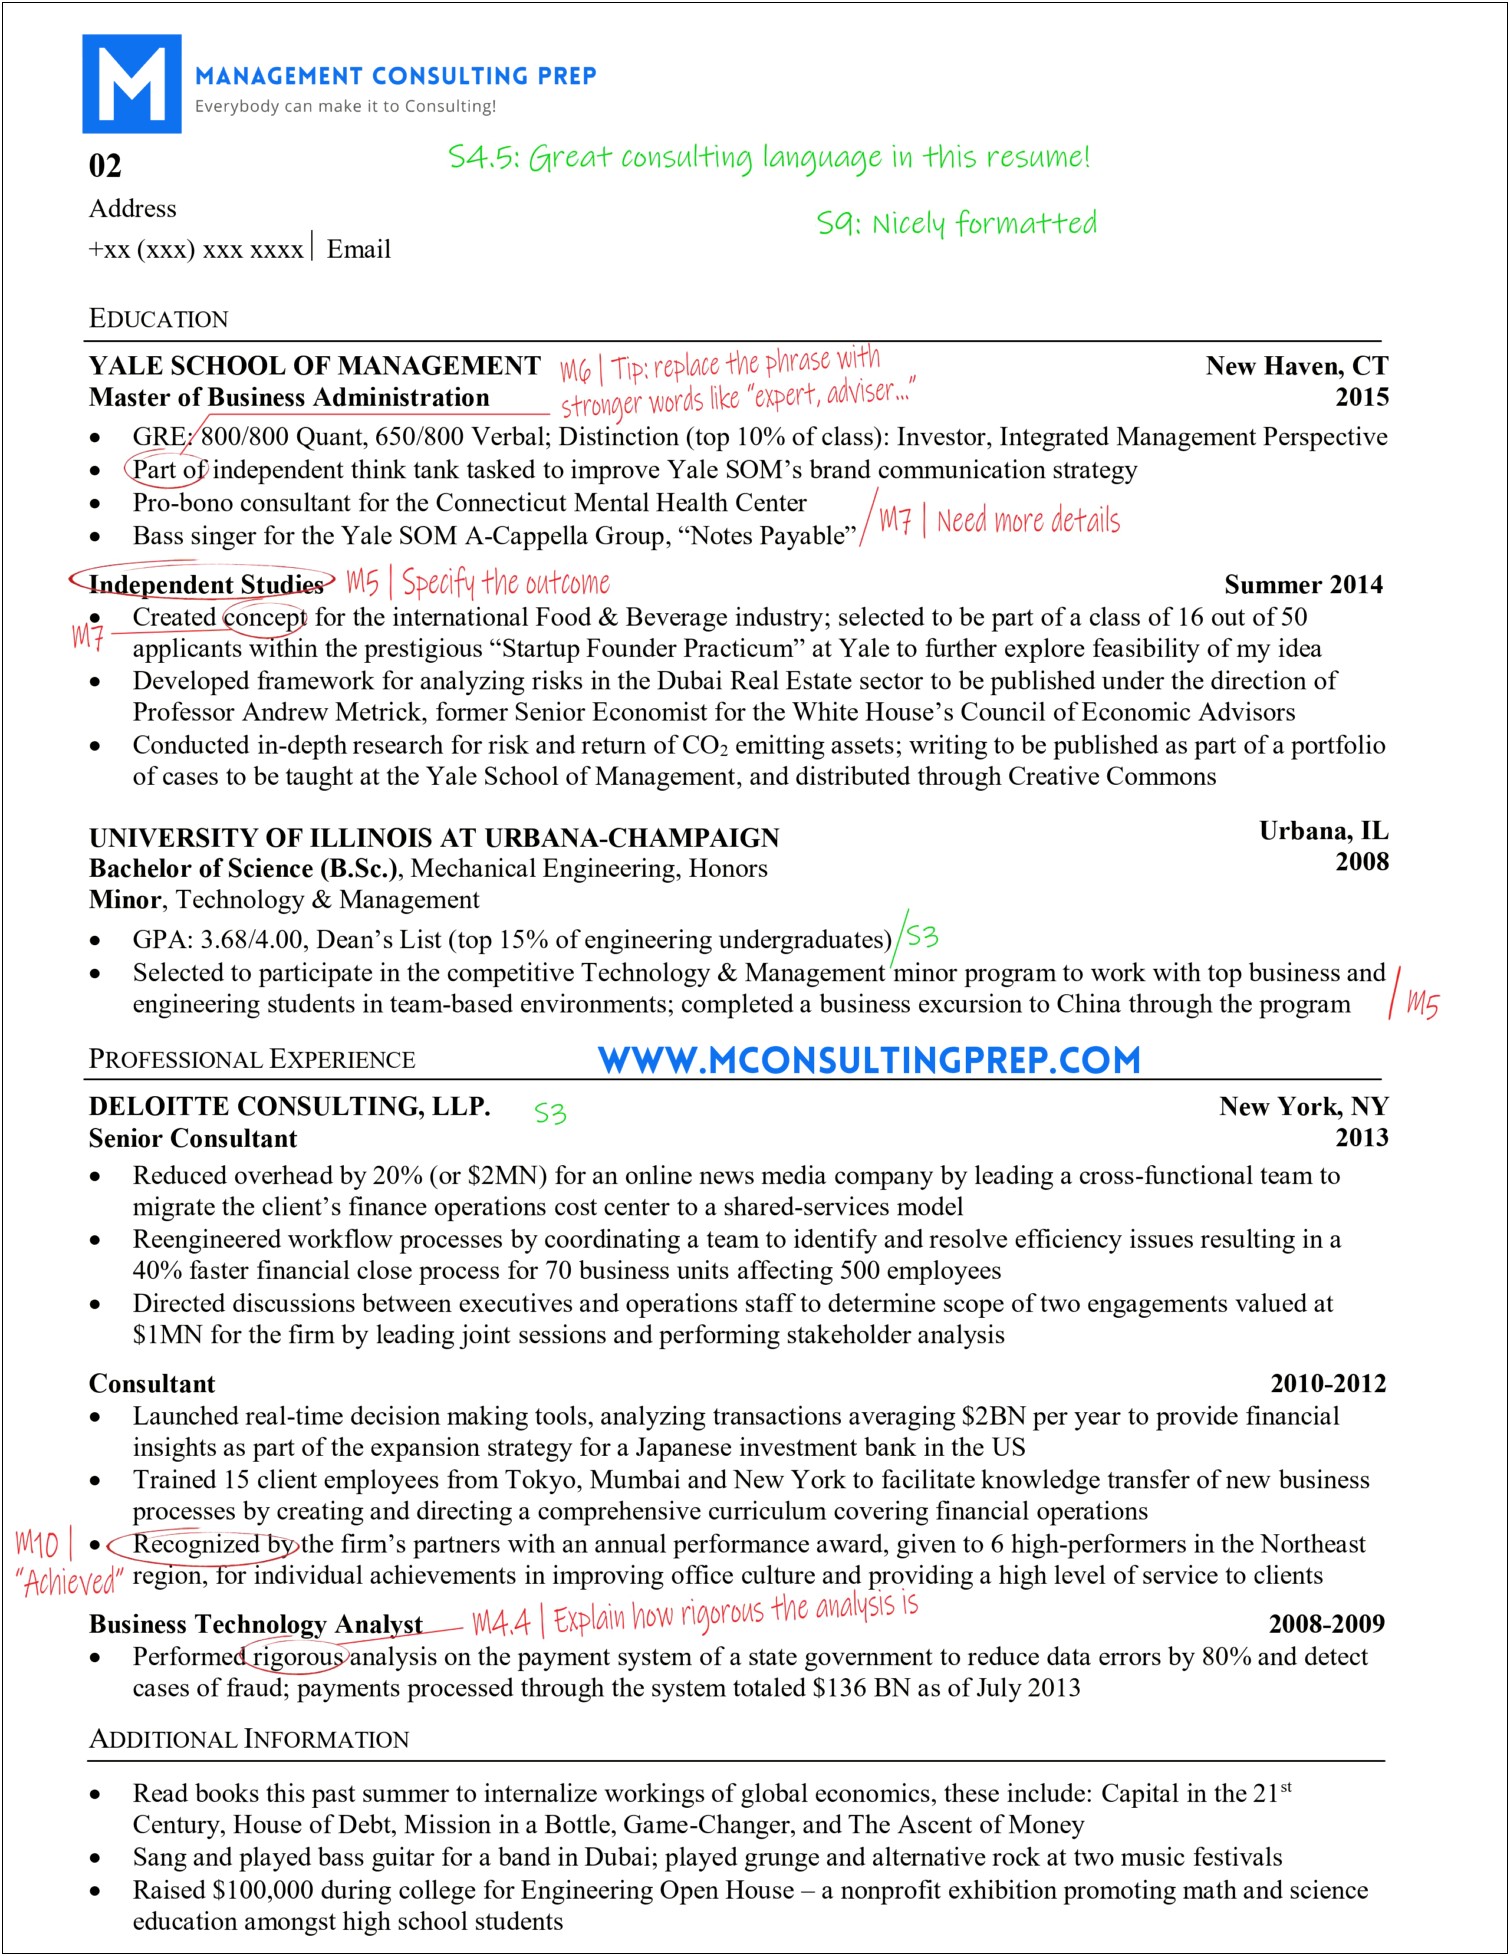 Sample Resumes For People.over 60